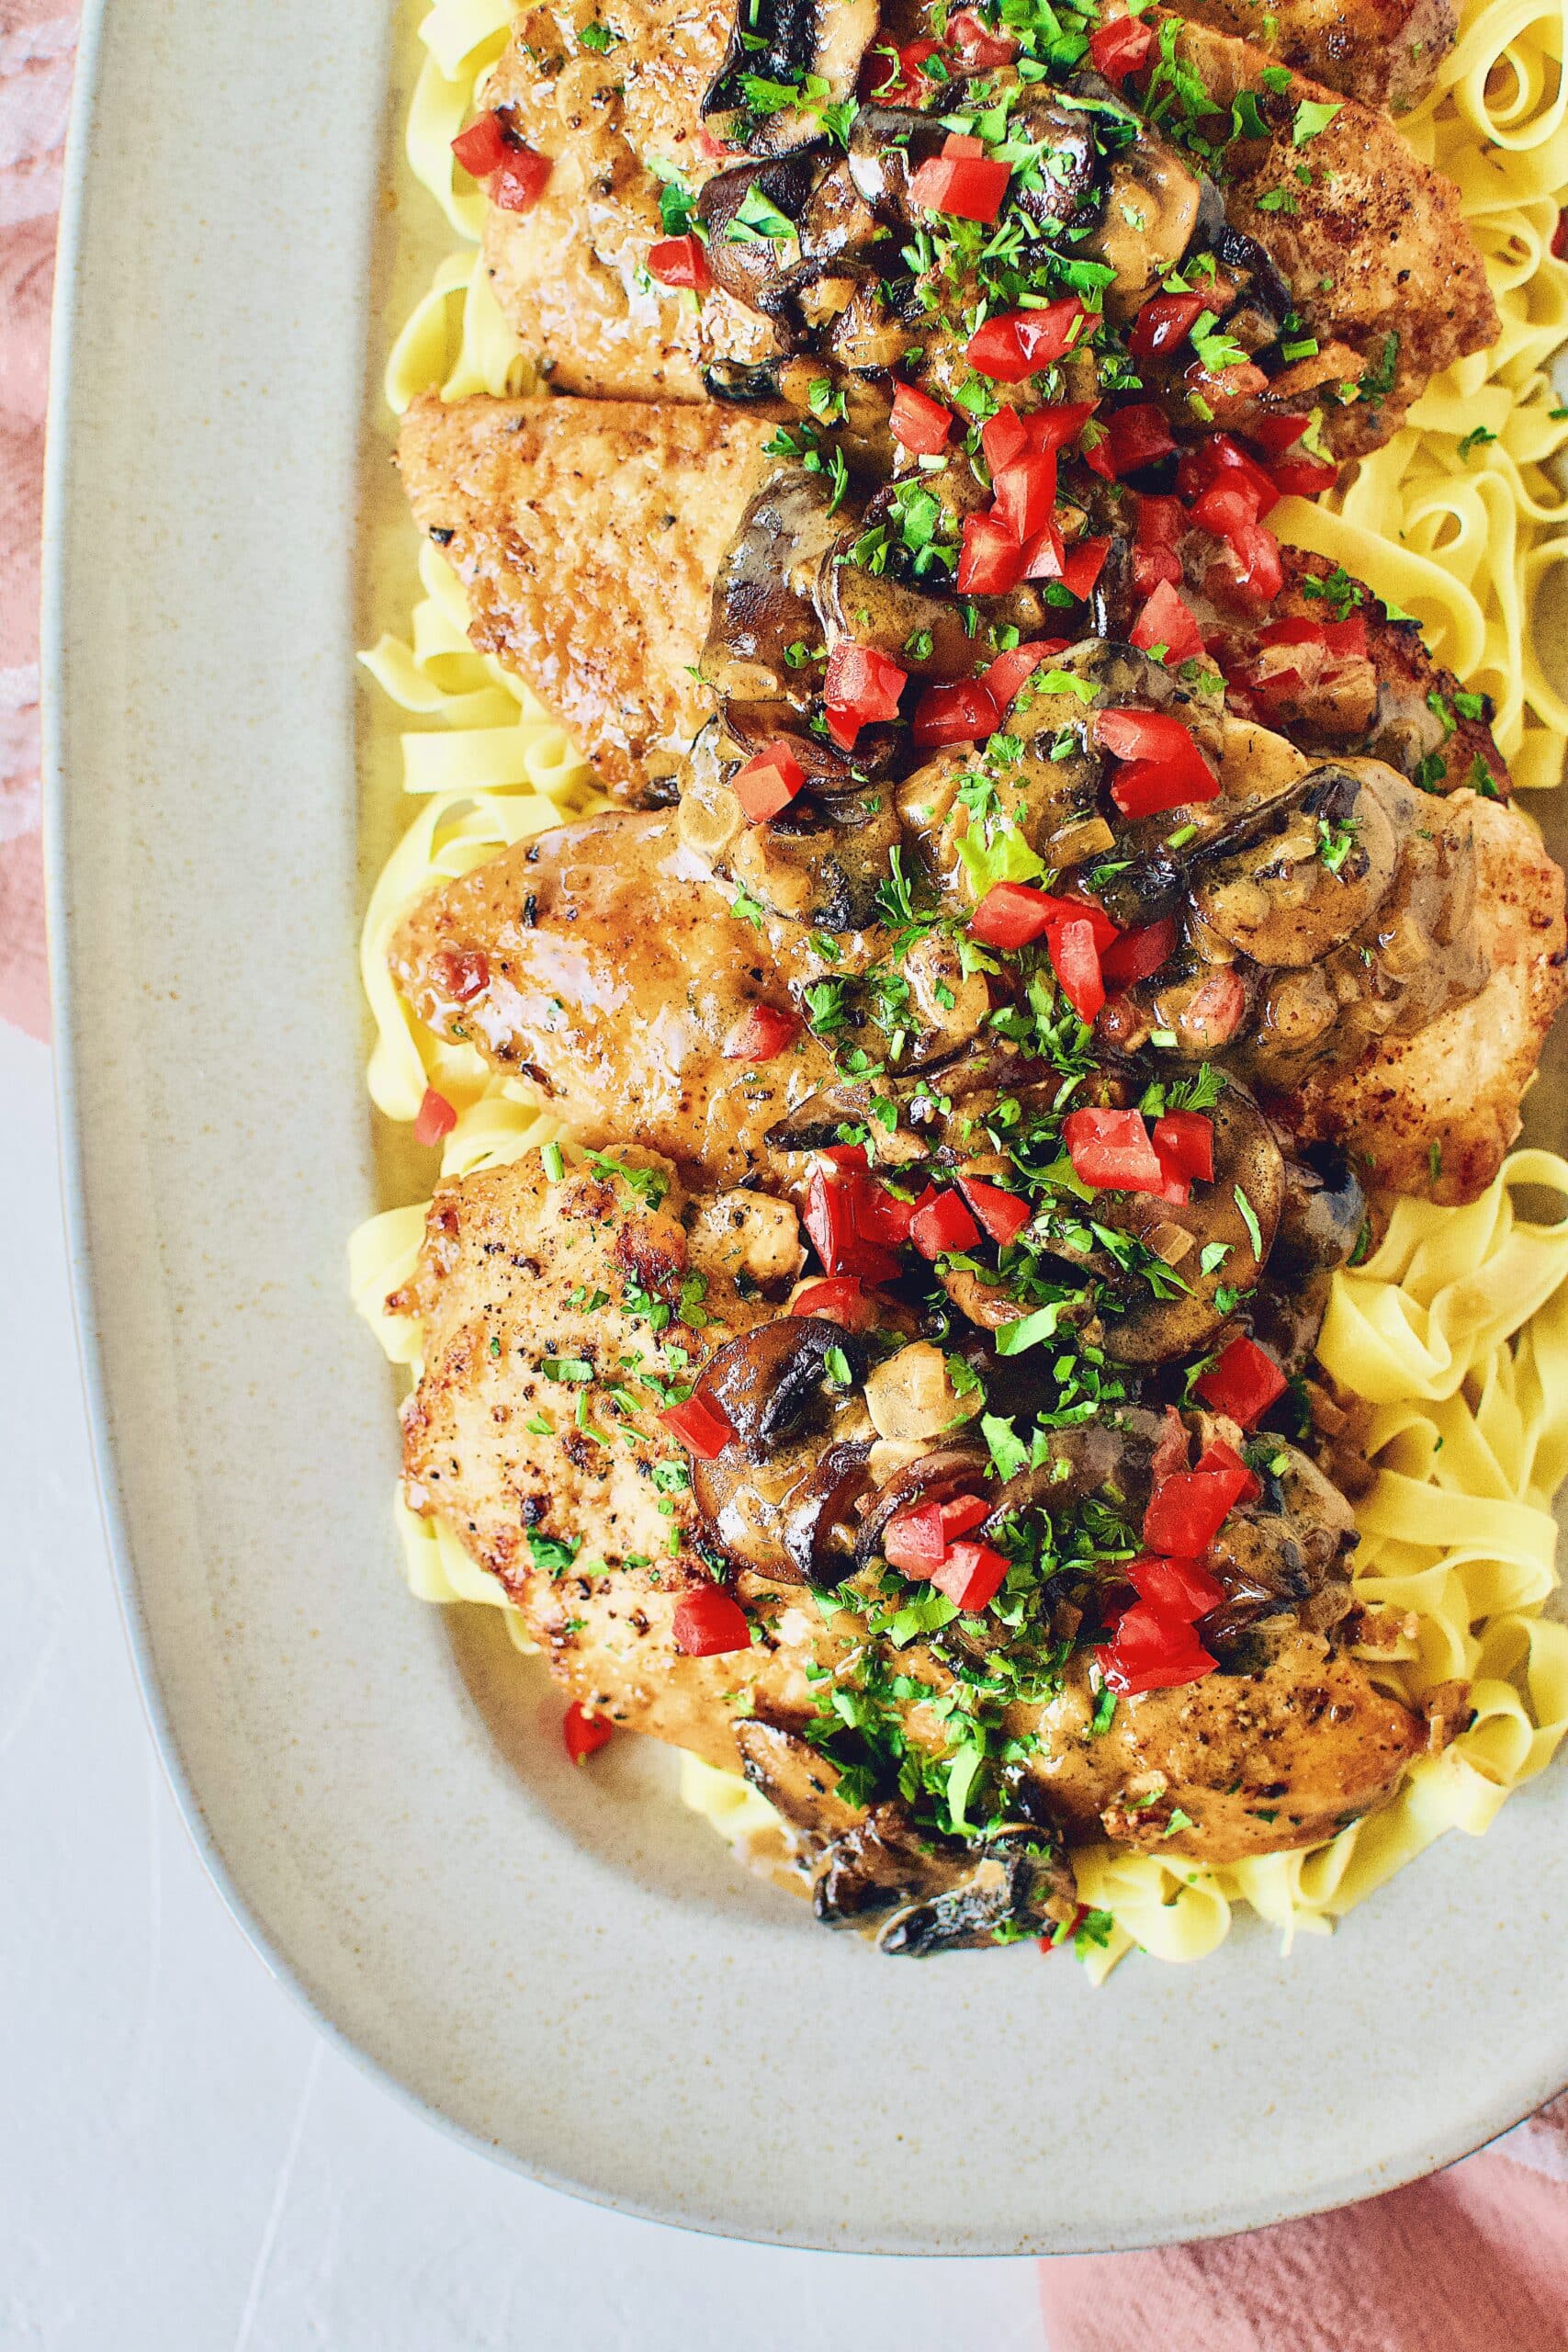 Creamy Chicken and Mushrooms served on a bed of fresh homemade pasta.